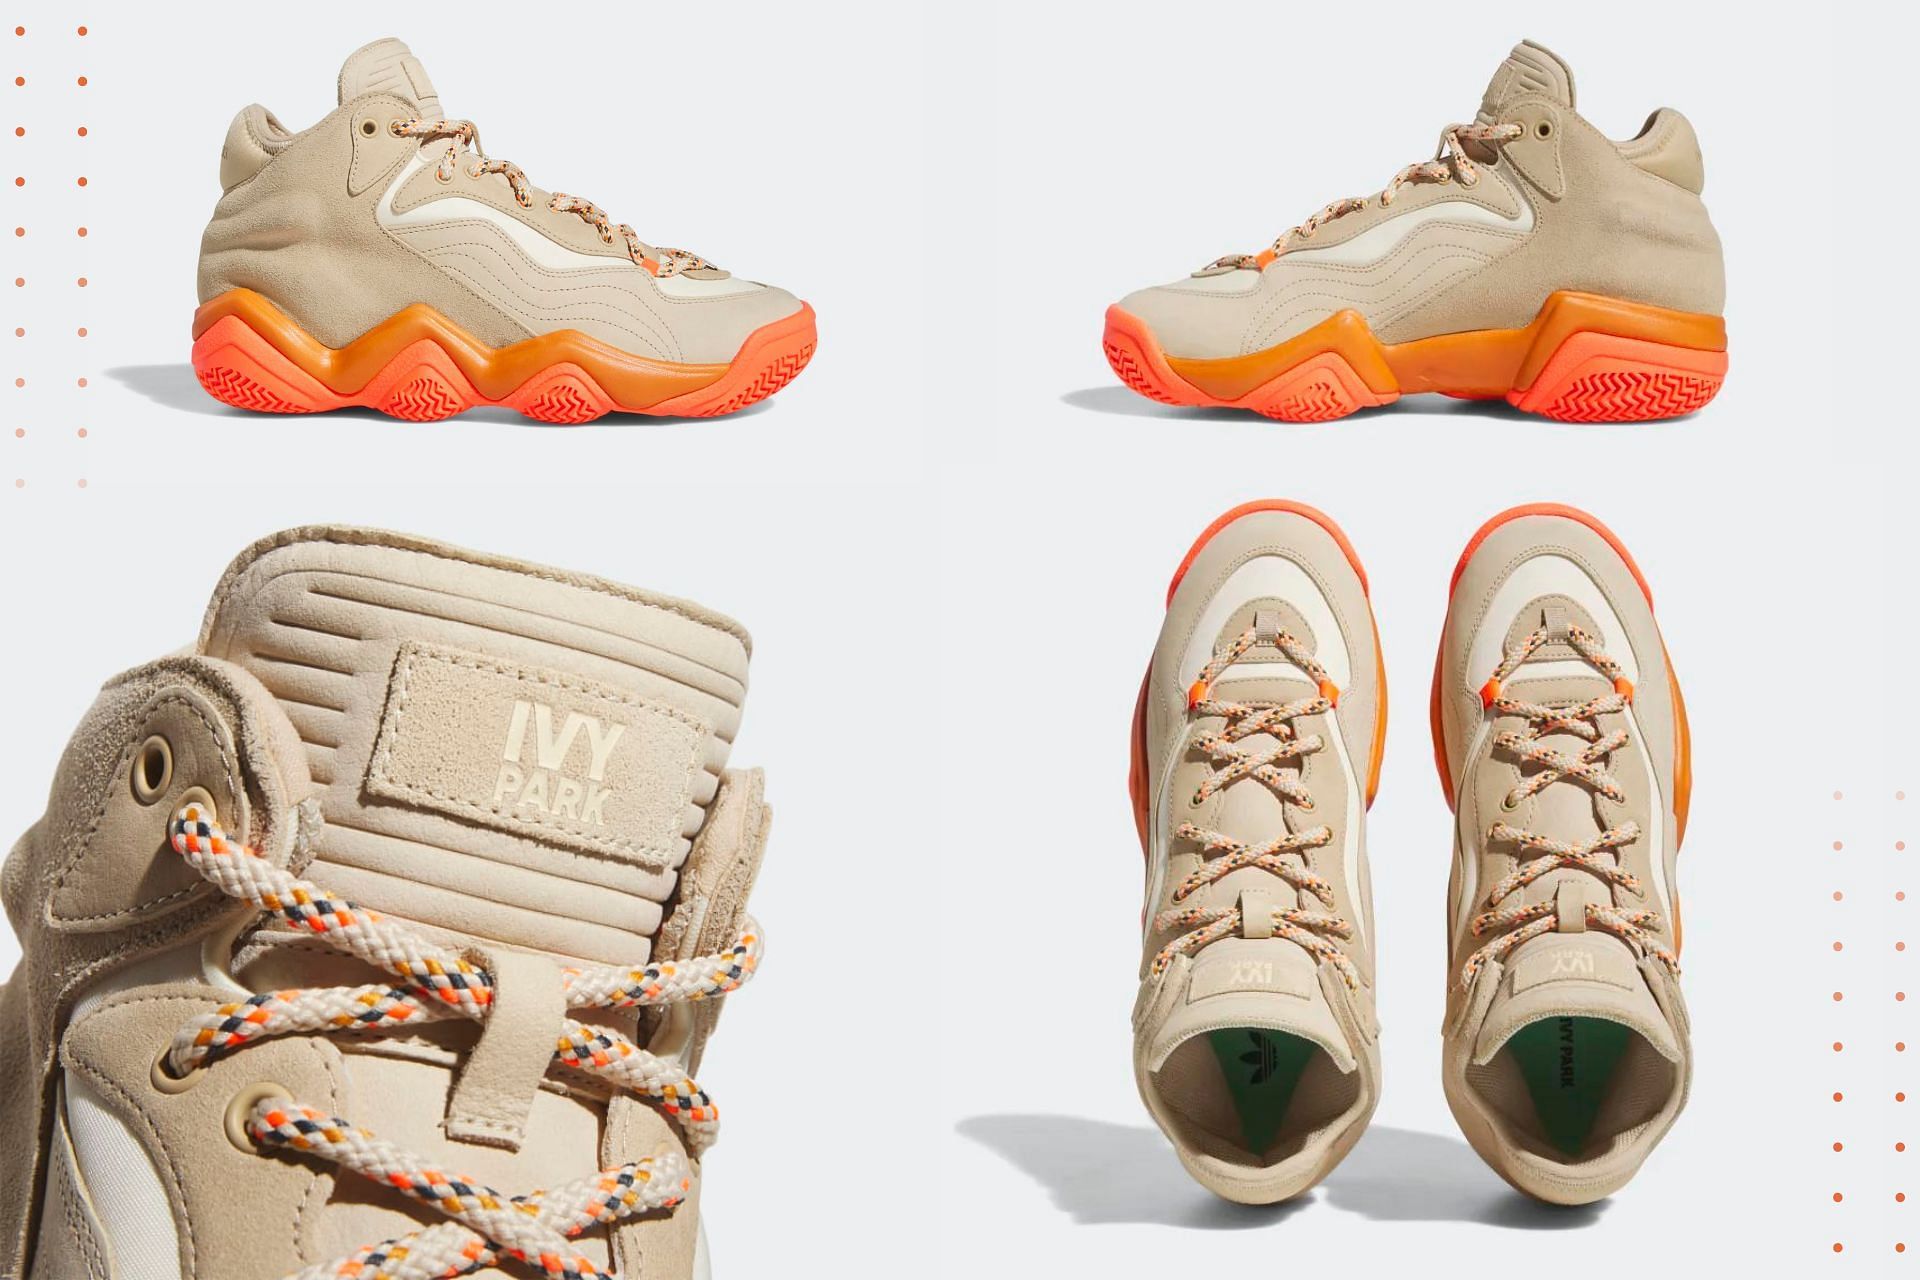 The upcoming Adidas x Beyonce Ivy Park Top Ten 2000 sneakers come clad in a beige and orange color scheme (Image via Sportskeeda)